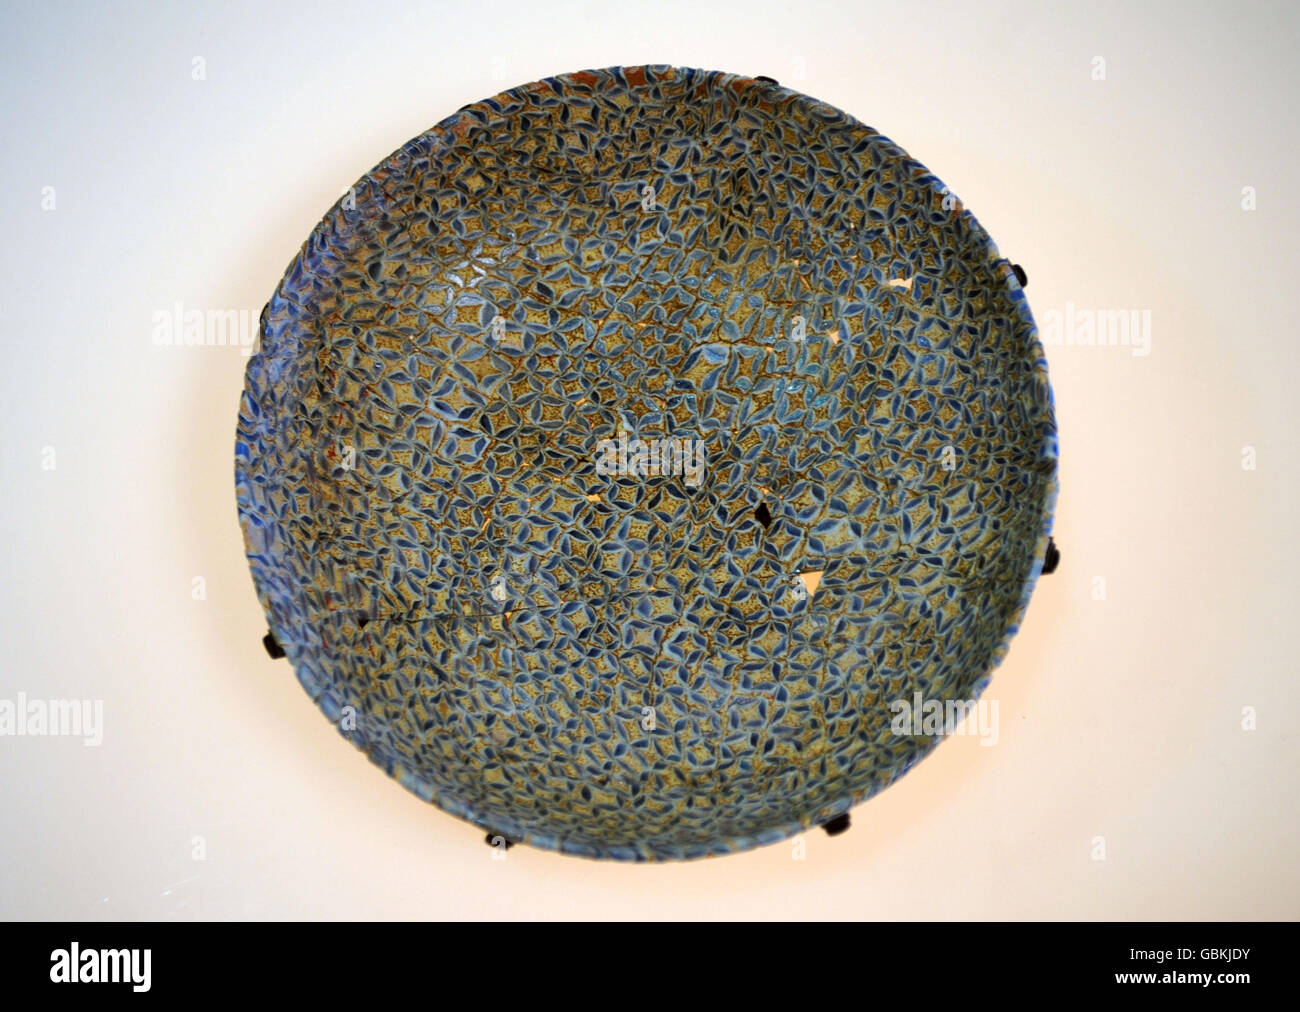 A rare Roman millefiori dish on display at the Museum of London, after it was unearthed from the grave of a wealthy Londoner. It is thought to be the first find of its kind in the western Roman empire. Stock Photo